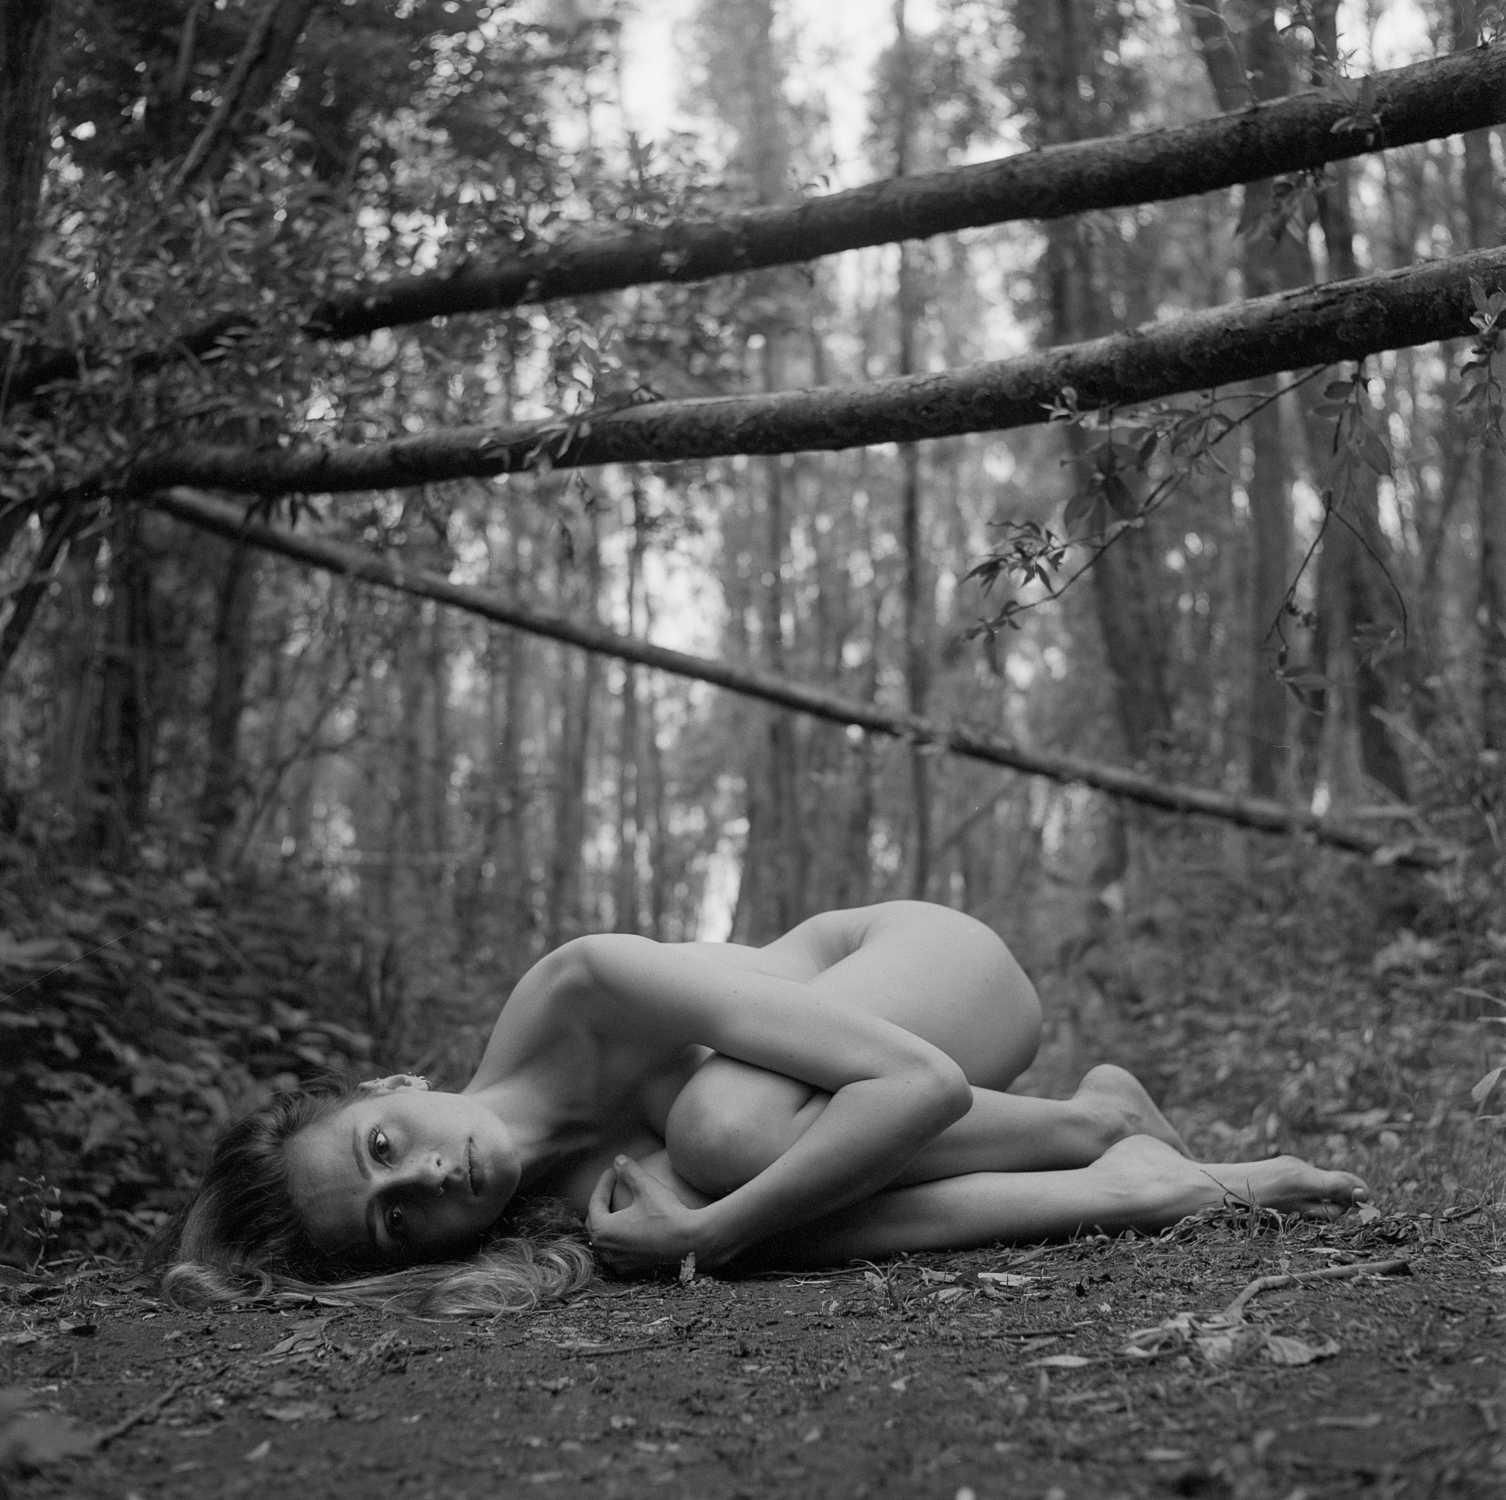 Miserable Hottie Emma Helena Posing Totally Naked in the Woods.